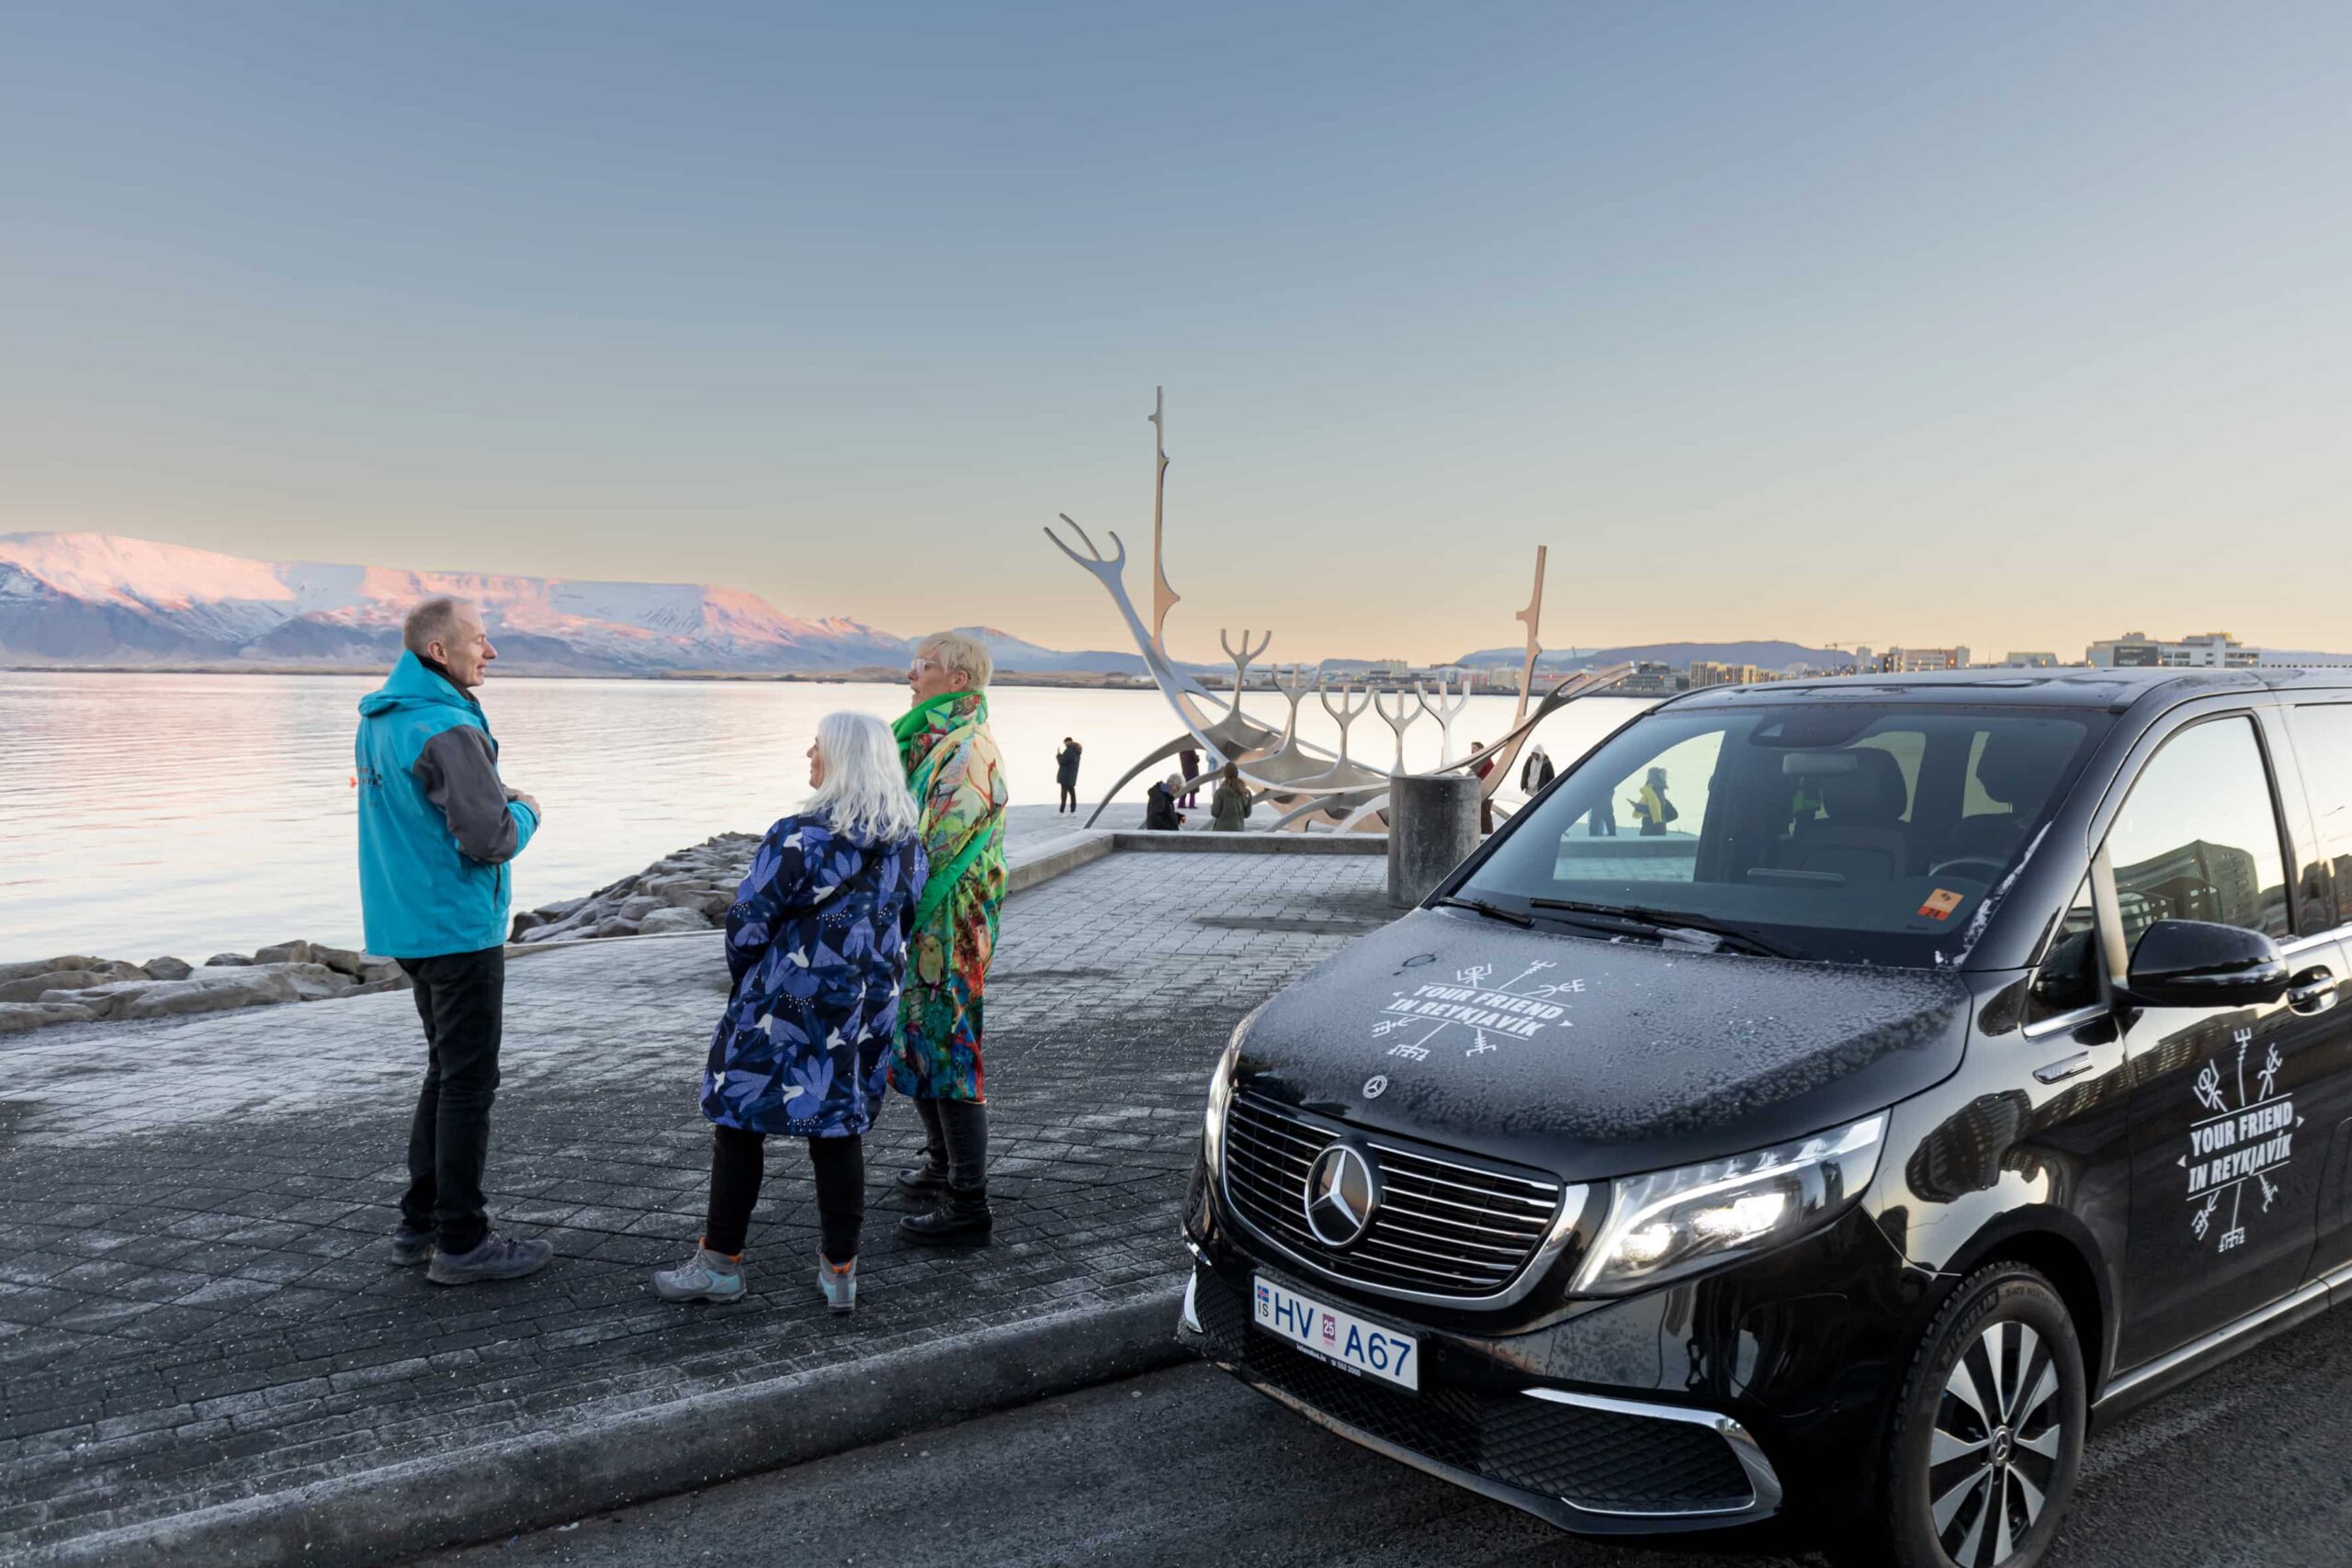 A group of travellers at the Sun Voyager in Reykjavik